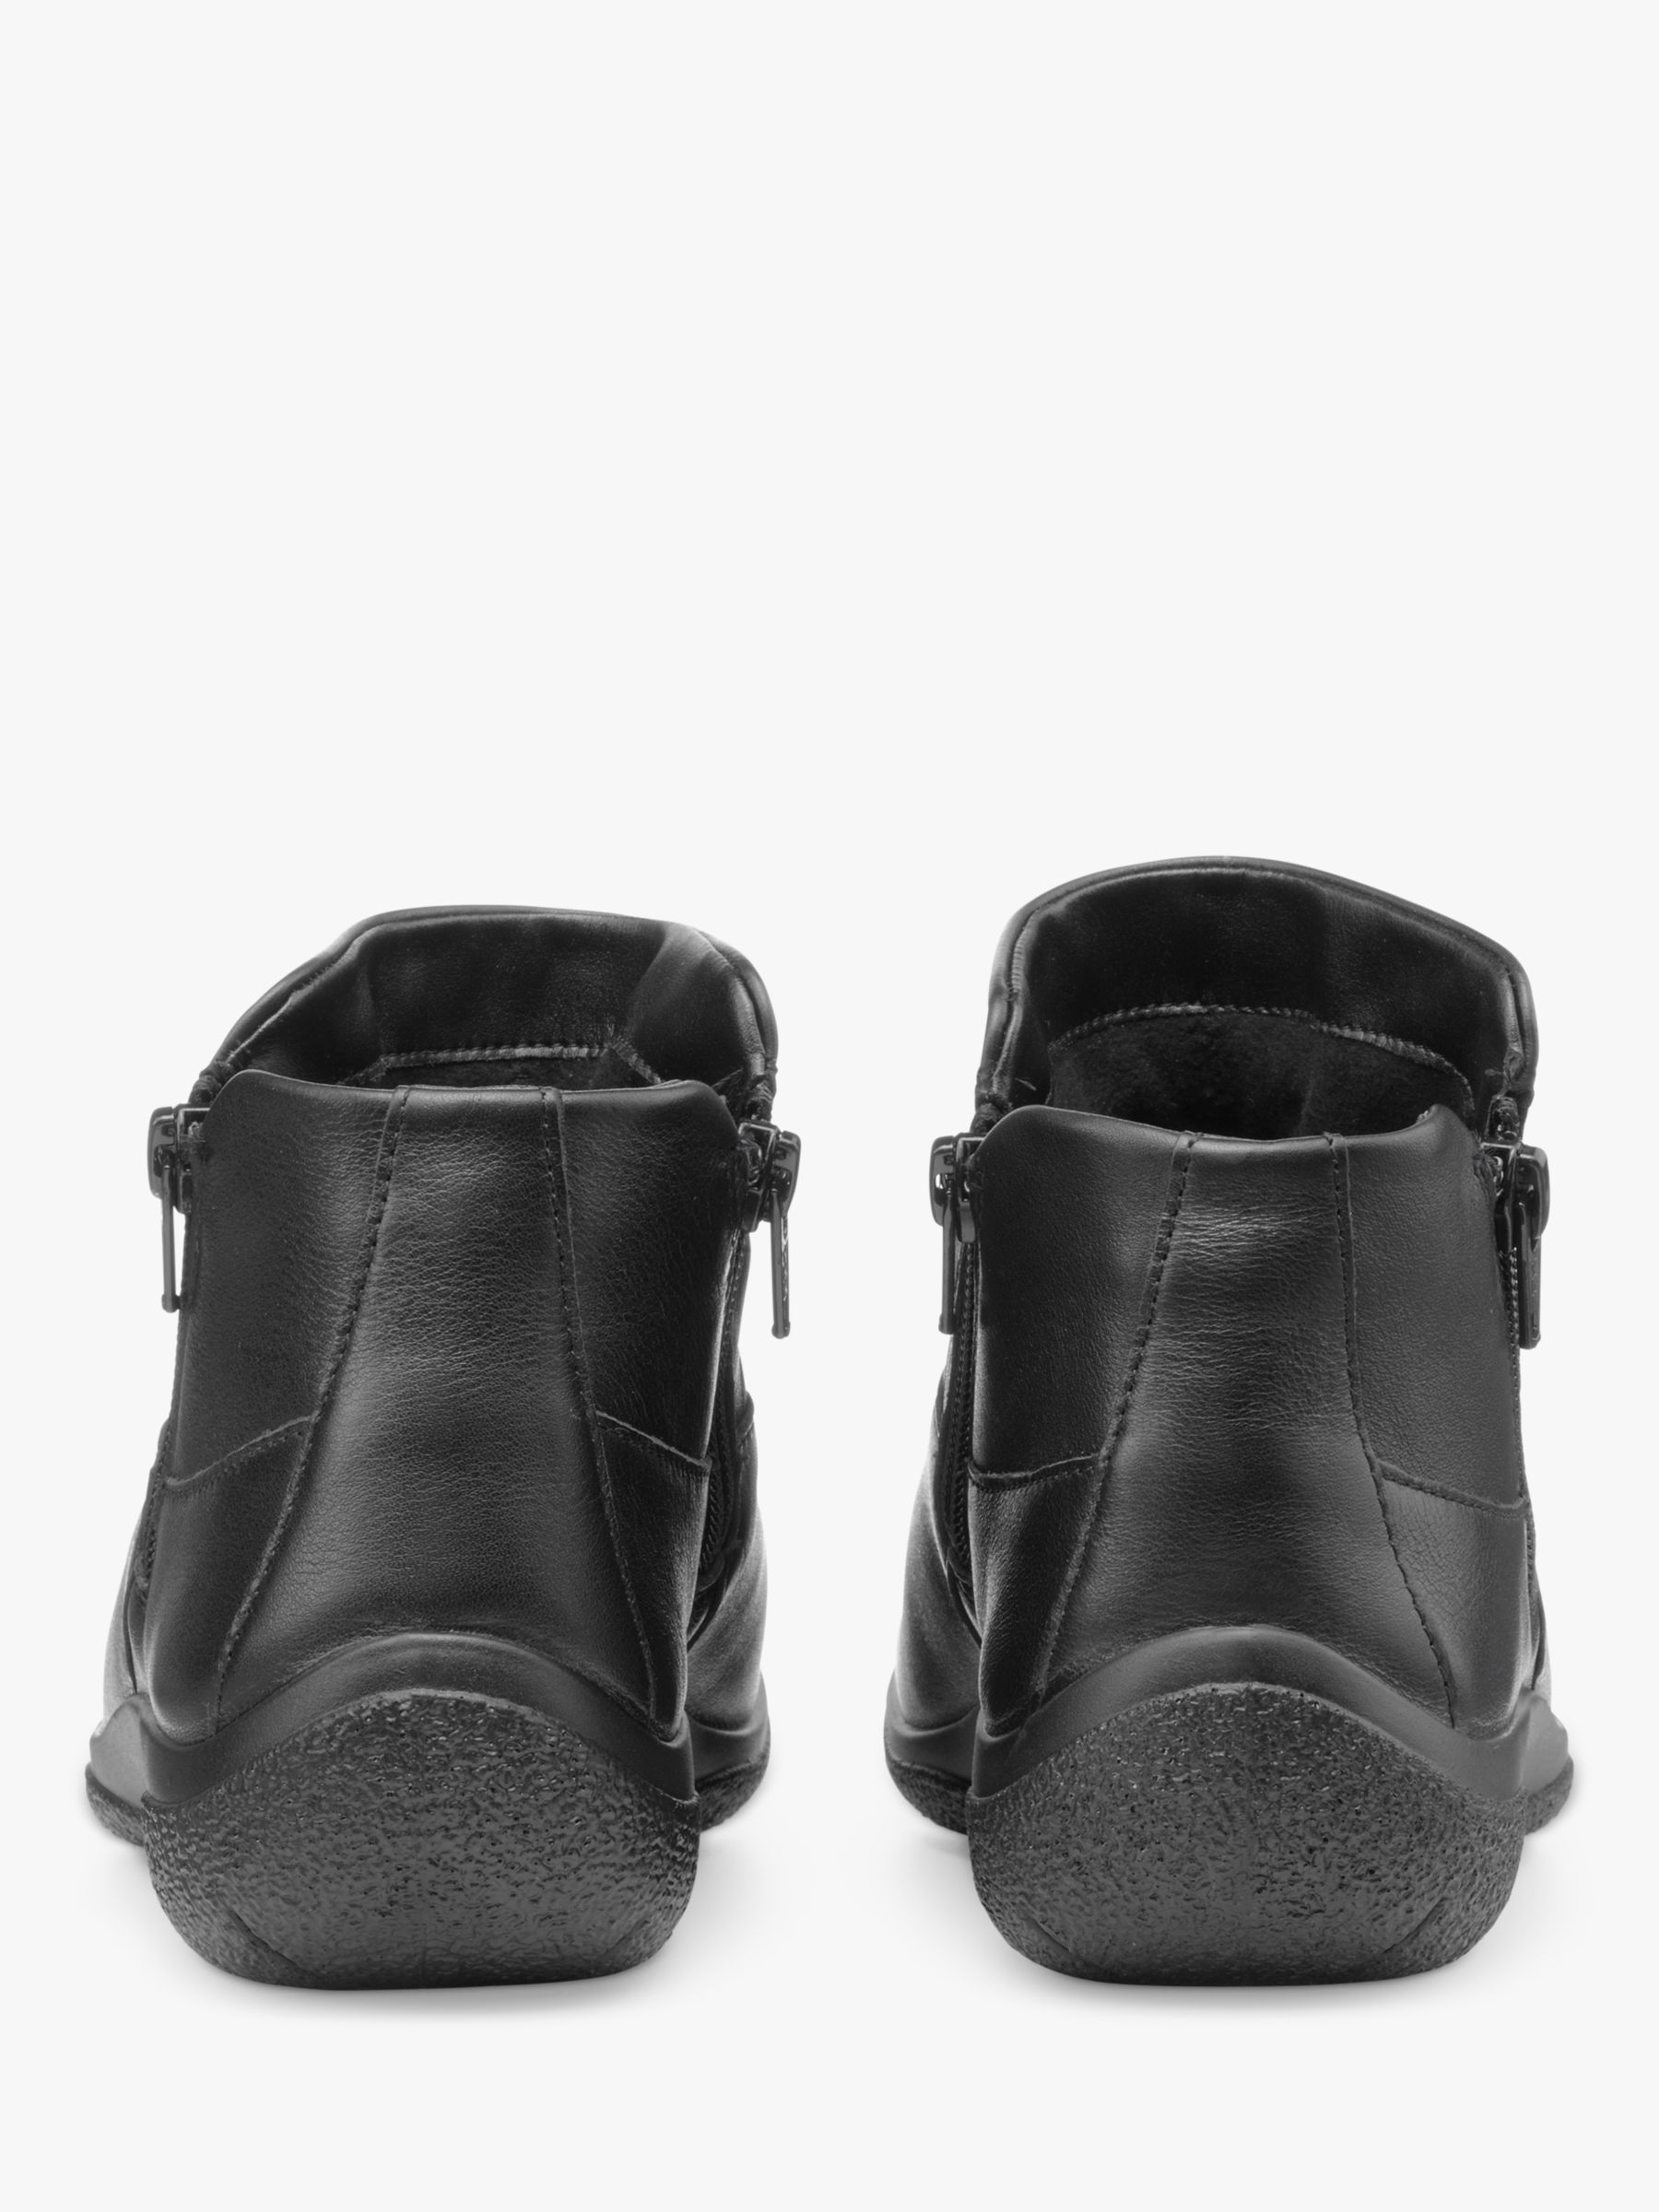 Buy Hotter Murmur Leather Ankle Boots Online at johnlewis.com